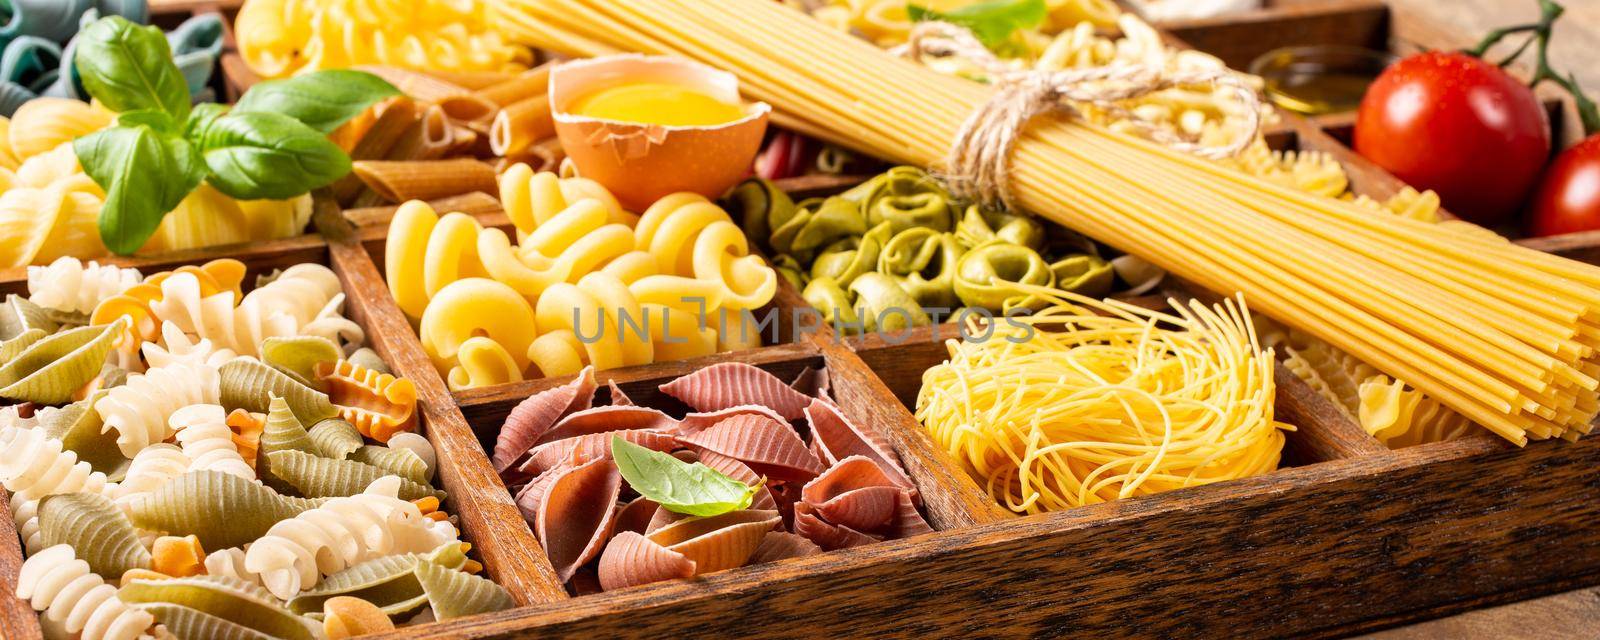 Spaghetti and assorted colorful italian pasta in wooden box. Healthy food background concept. Flat lay, top view. Banner.